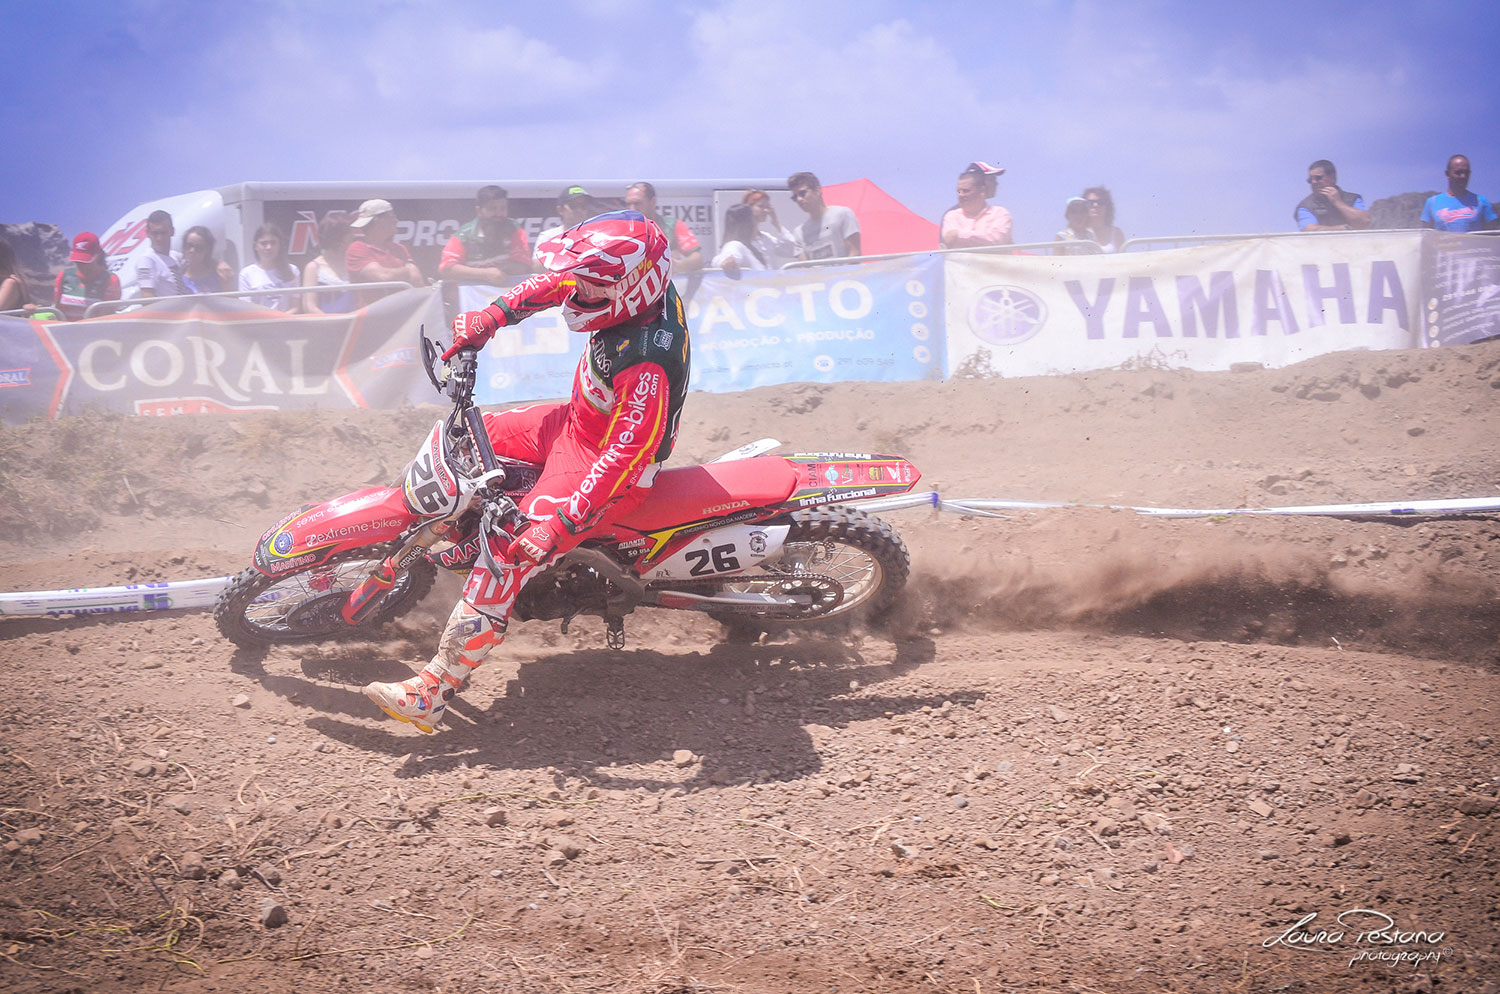 A rider making the berm on his honda crf on a motocross track